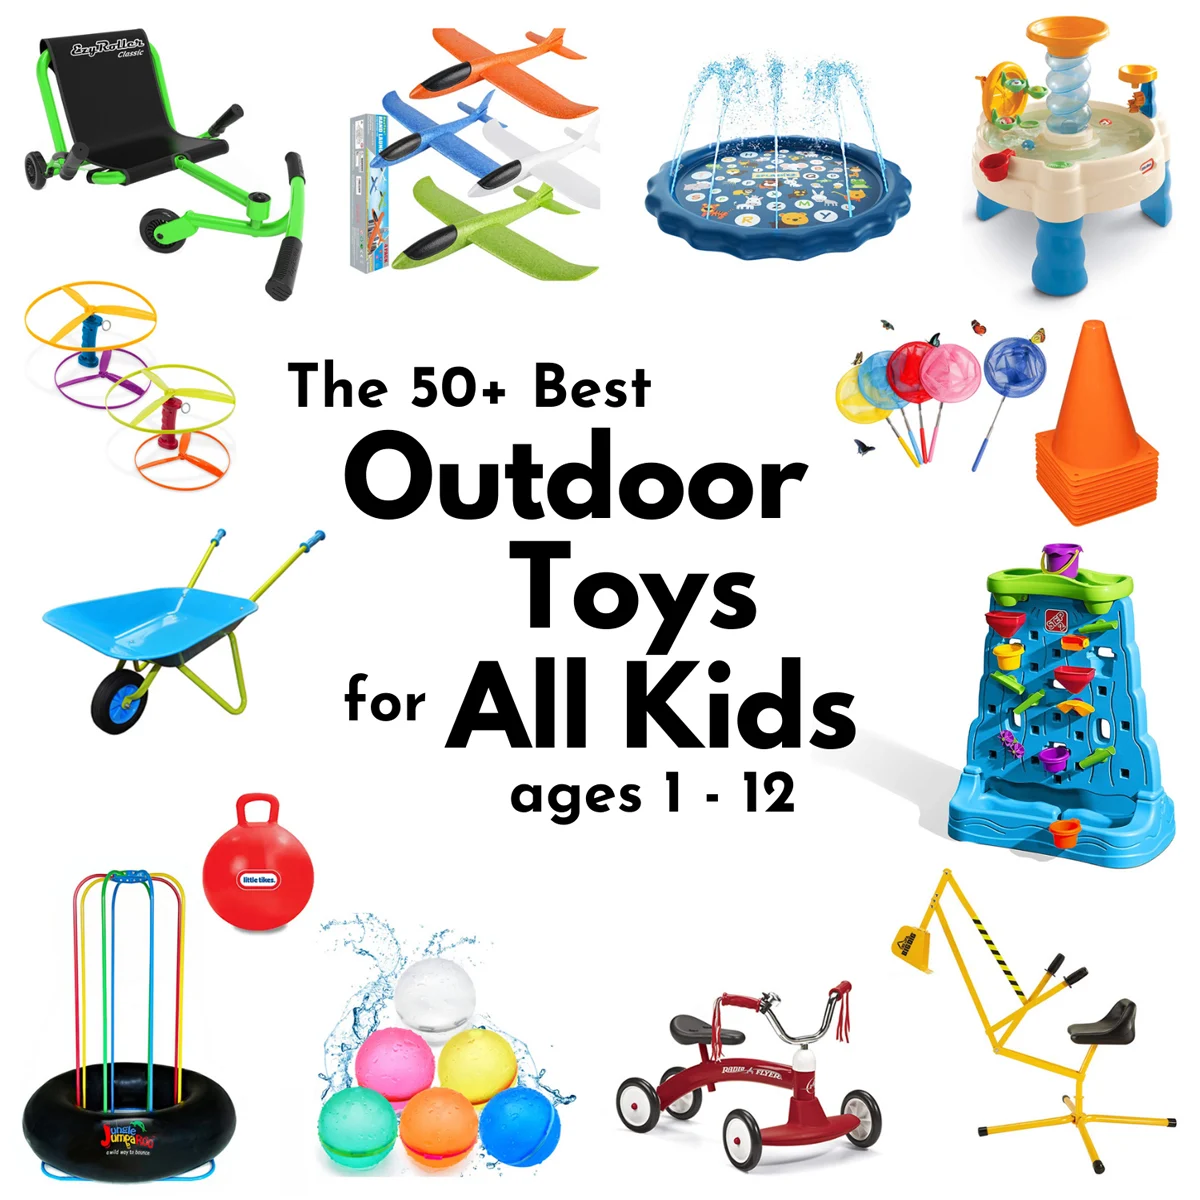 Popular toys for indoor and outdoor